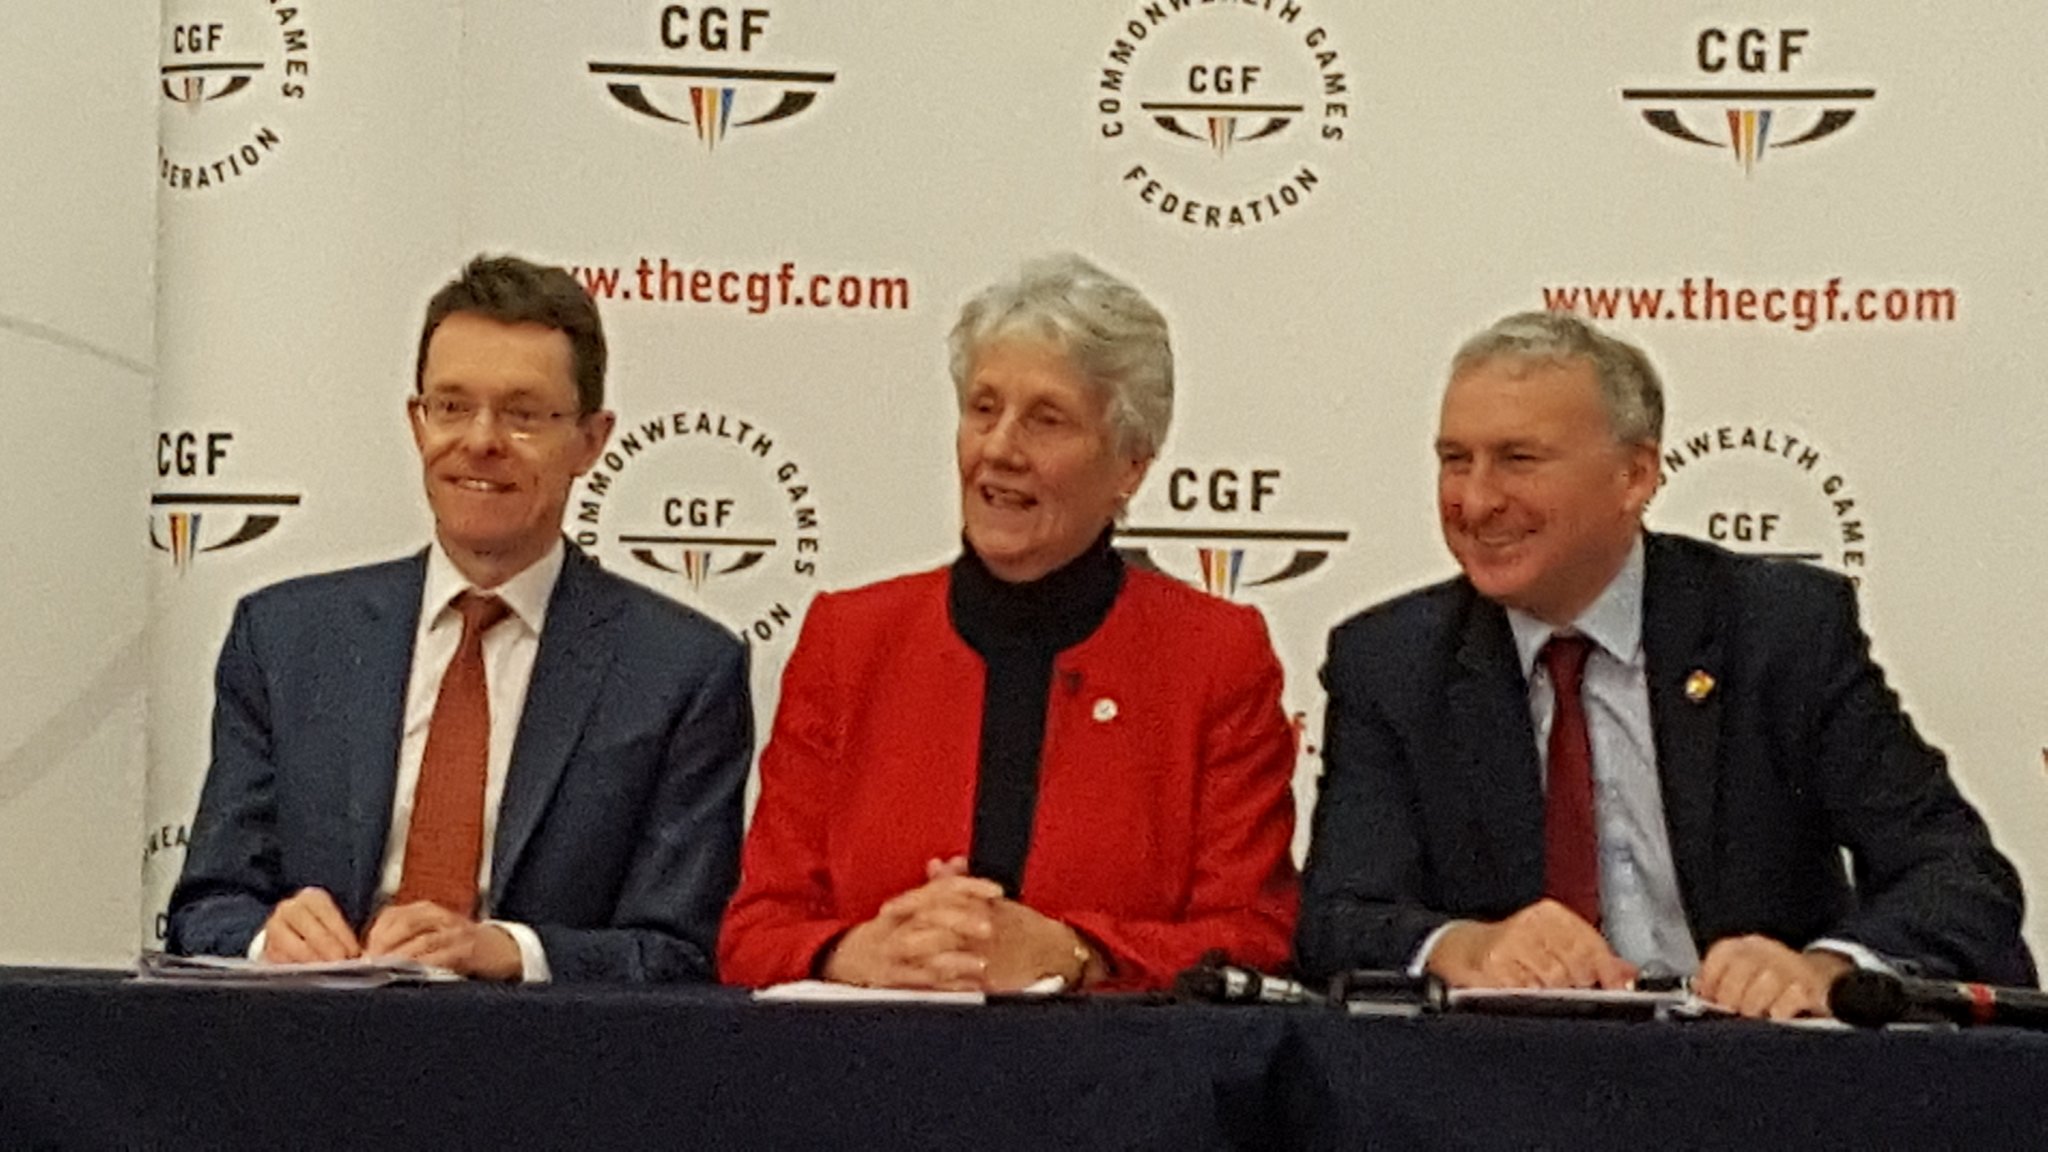 Picture Caption: Mayor of the West Midlands Andy Street (left) and Cllr Ian Ward, leader of Birmingham City Council and chair of the bid team (right) join CGF President Louise Martin as she announces Birmingham as the host city for the 2022 Commonwealth Games 